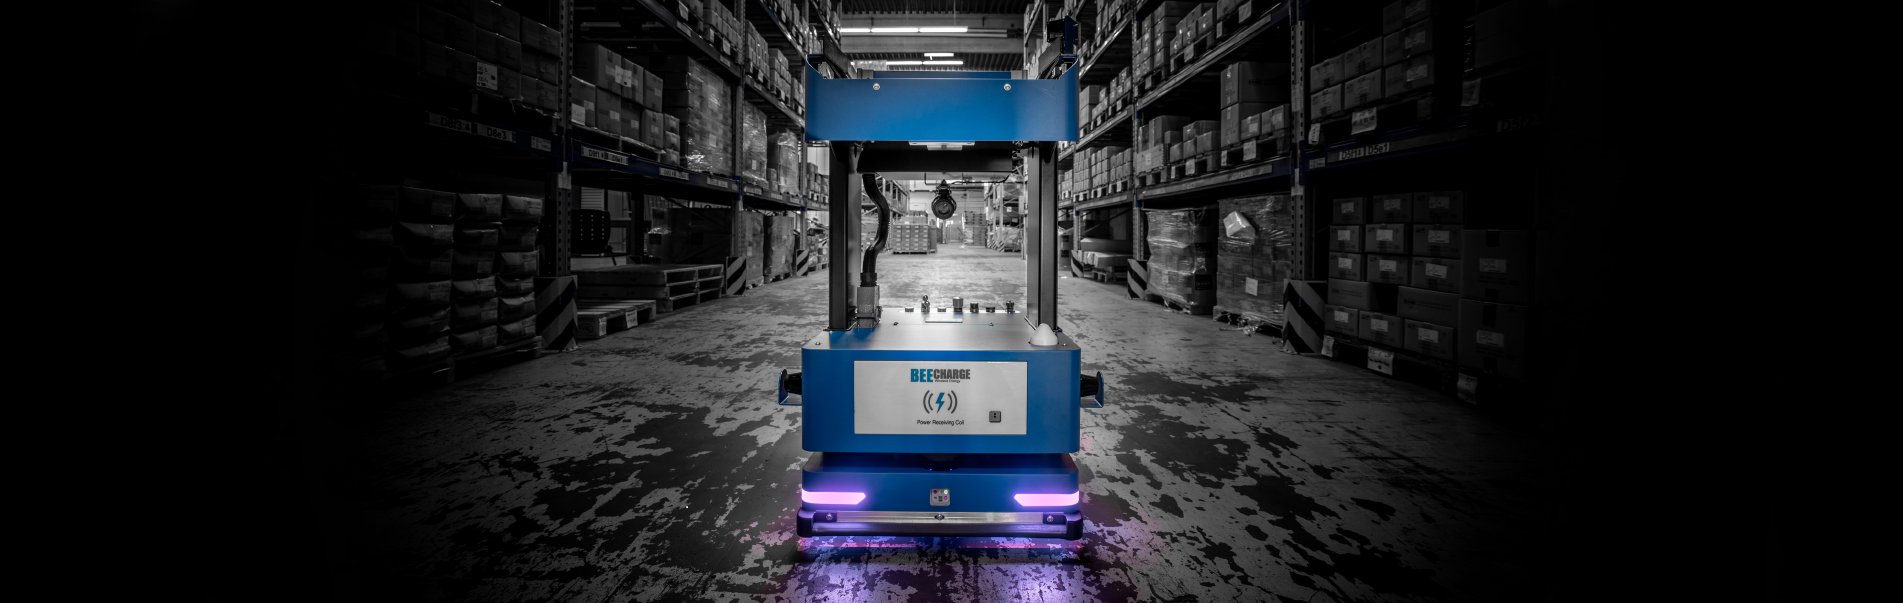 AMR BARY CM-100 navigates freely in large warehouse